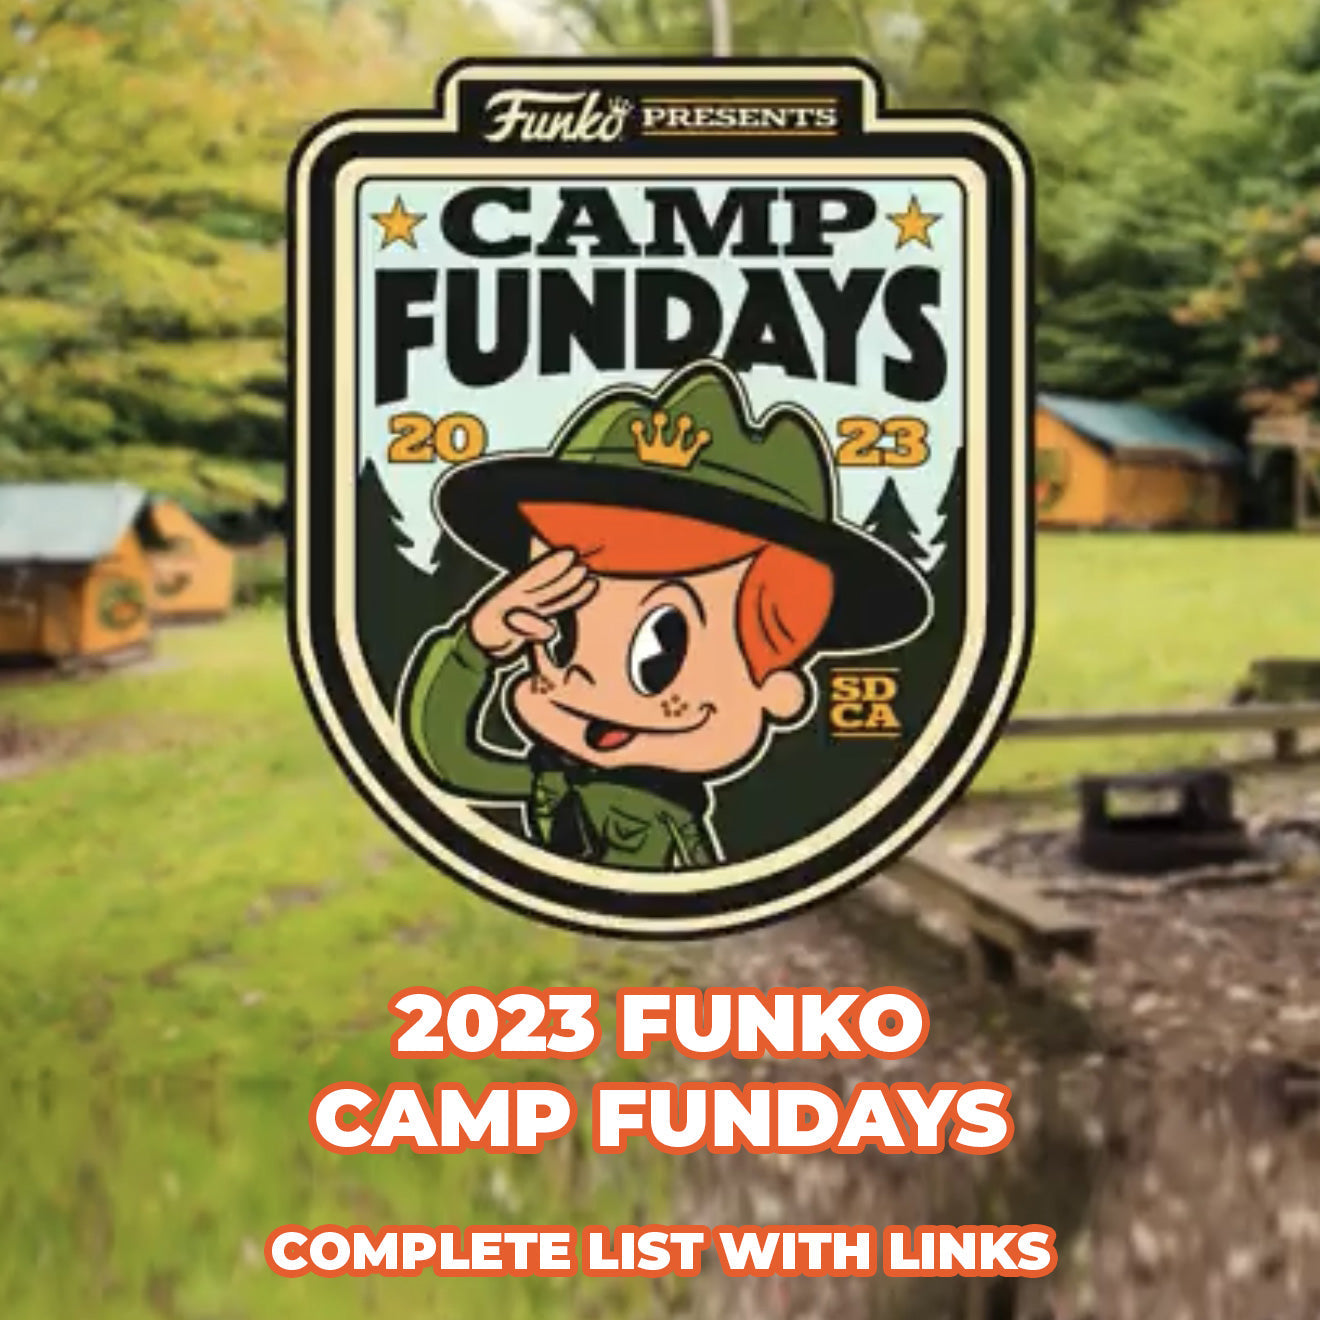 Funko Fun Fest 2023 set to take place at Funko HQ on August 26, 2023.  #Funko #Pop #FunkoPop #Collectibles #Toys #FunkoFinderz 📸…